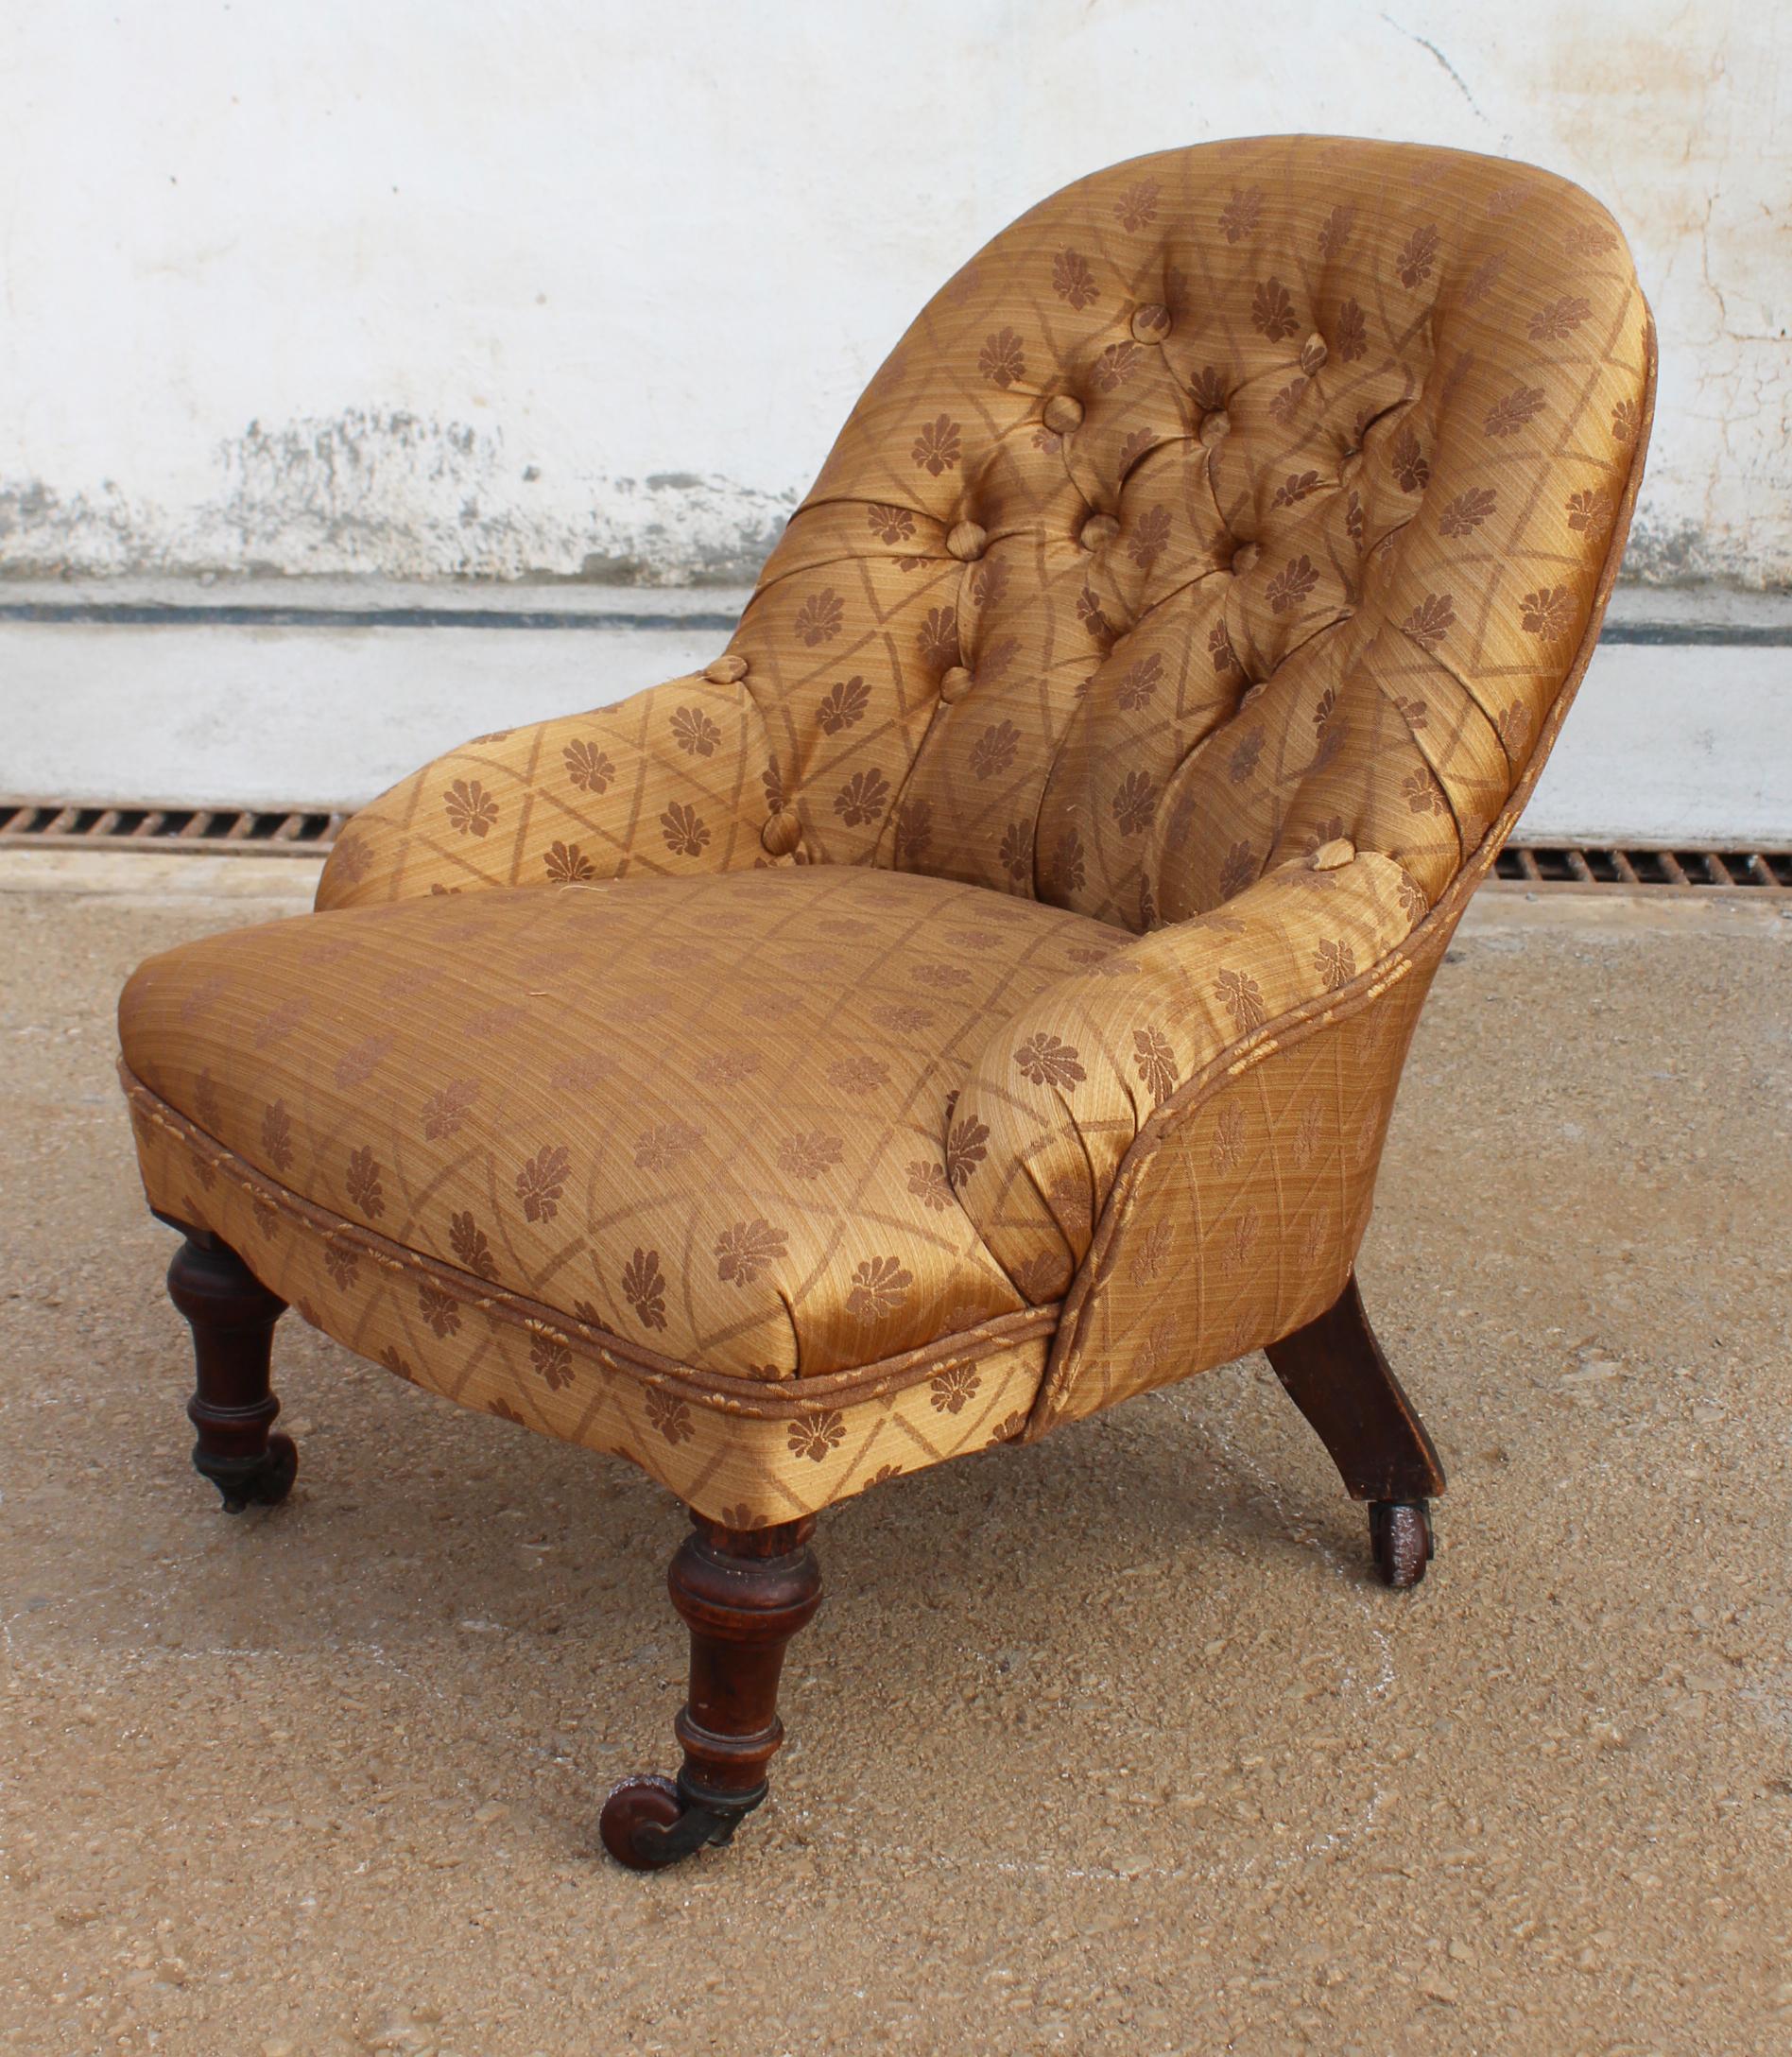 19th Century English Children's Chair with Mahogany Legs and Silk Upholstery For Sale 6